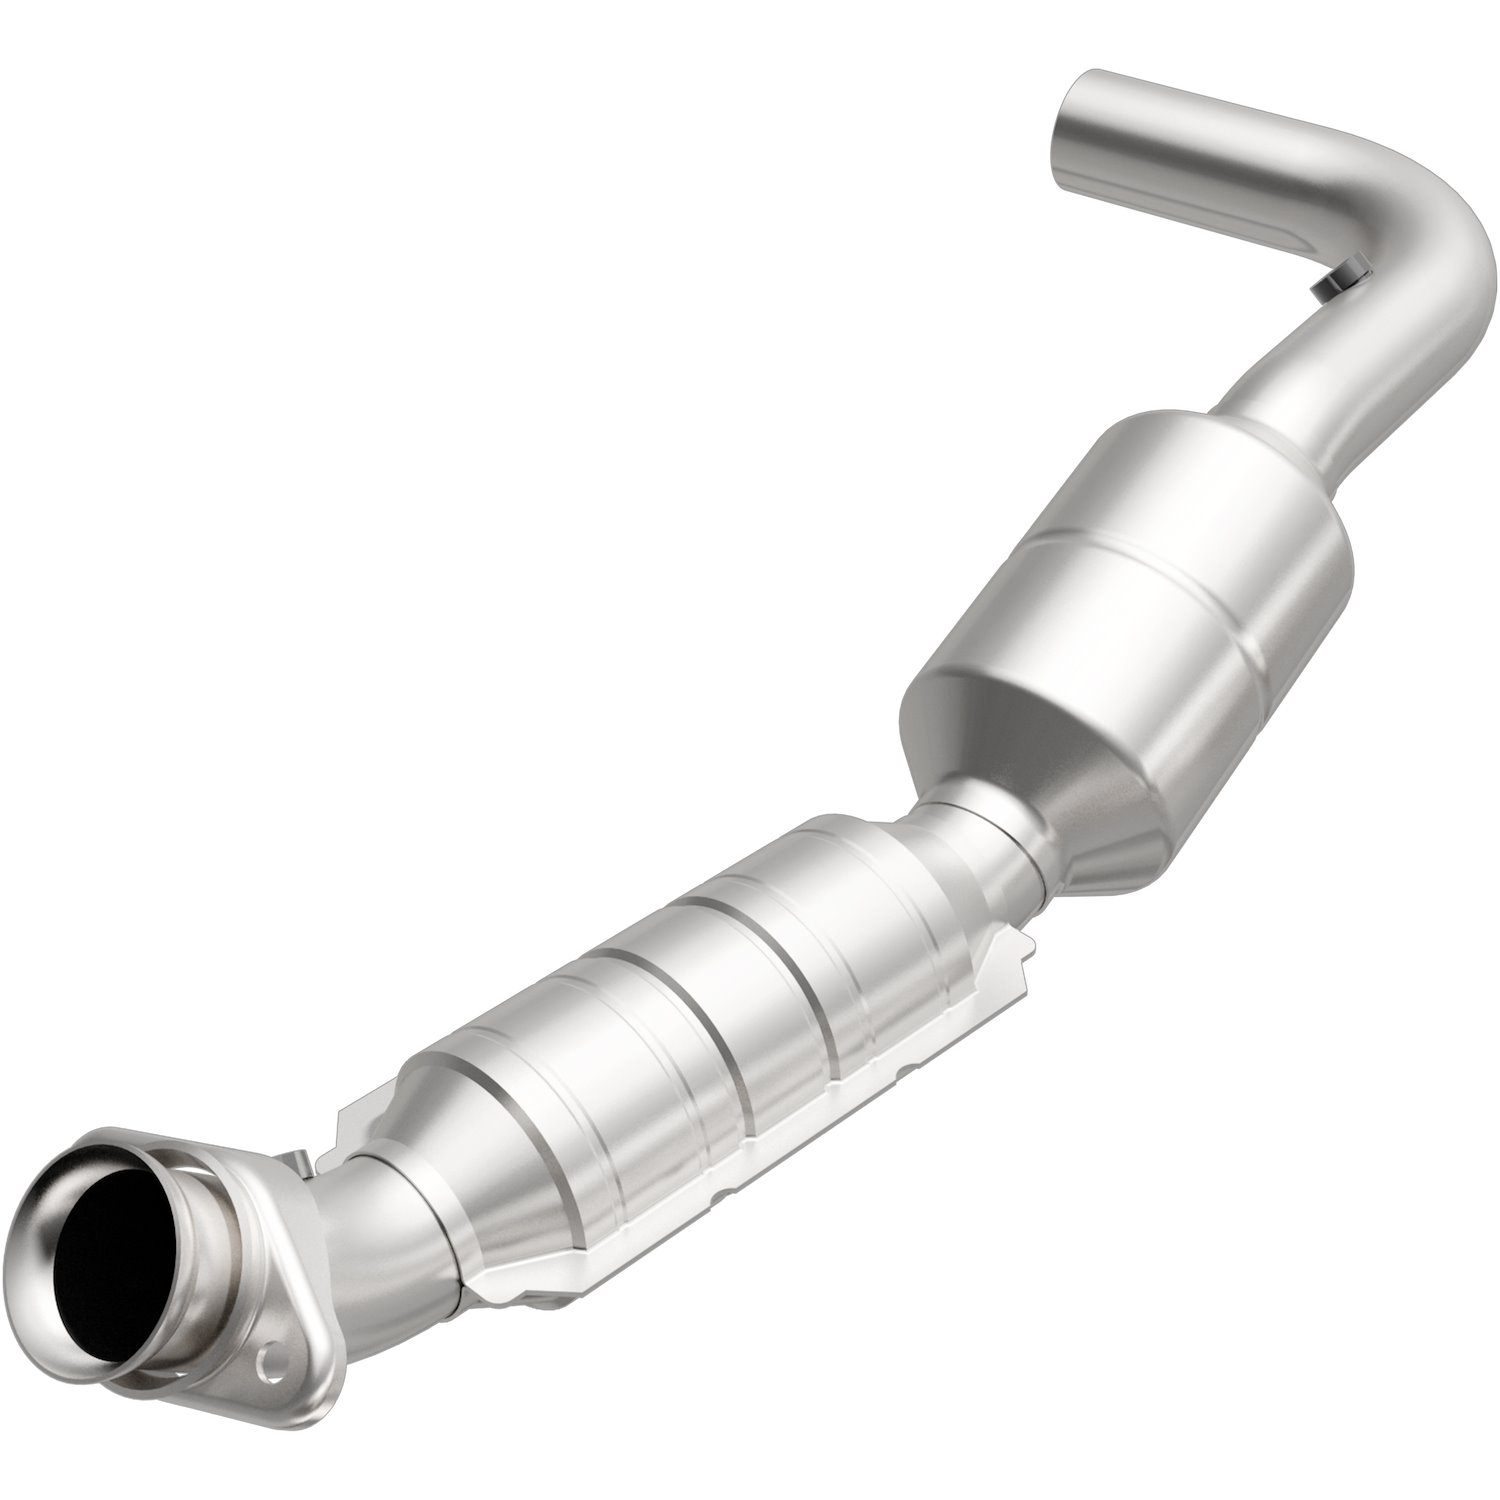 OEM Grade Federal / EPA Compliant Direct-Fit Catalytic Converter 51311